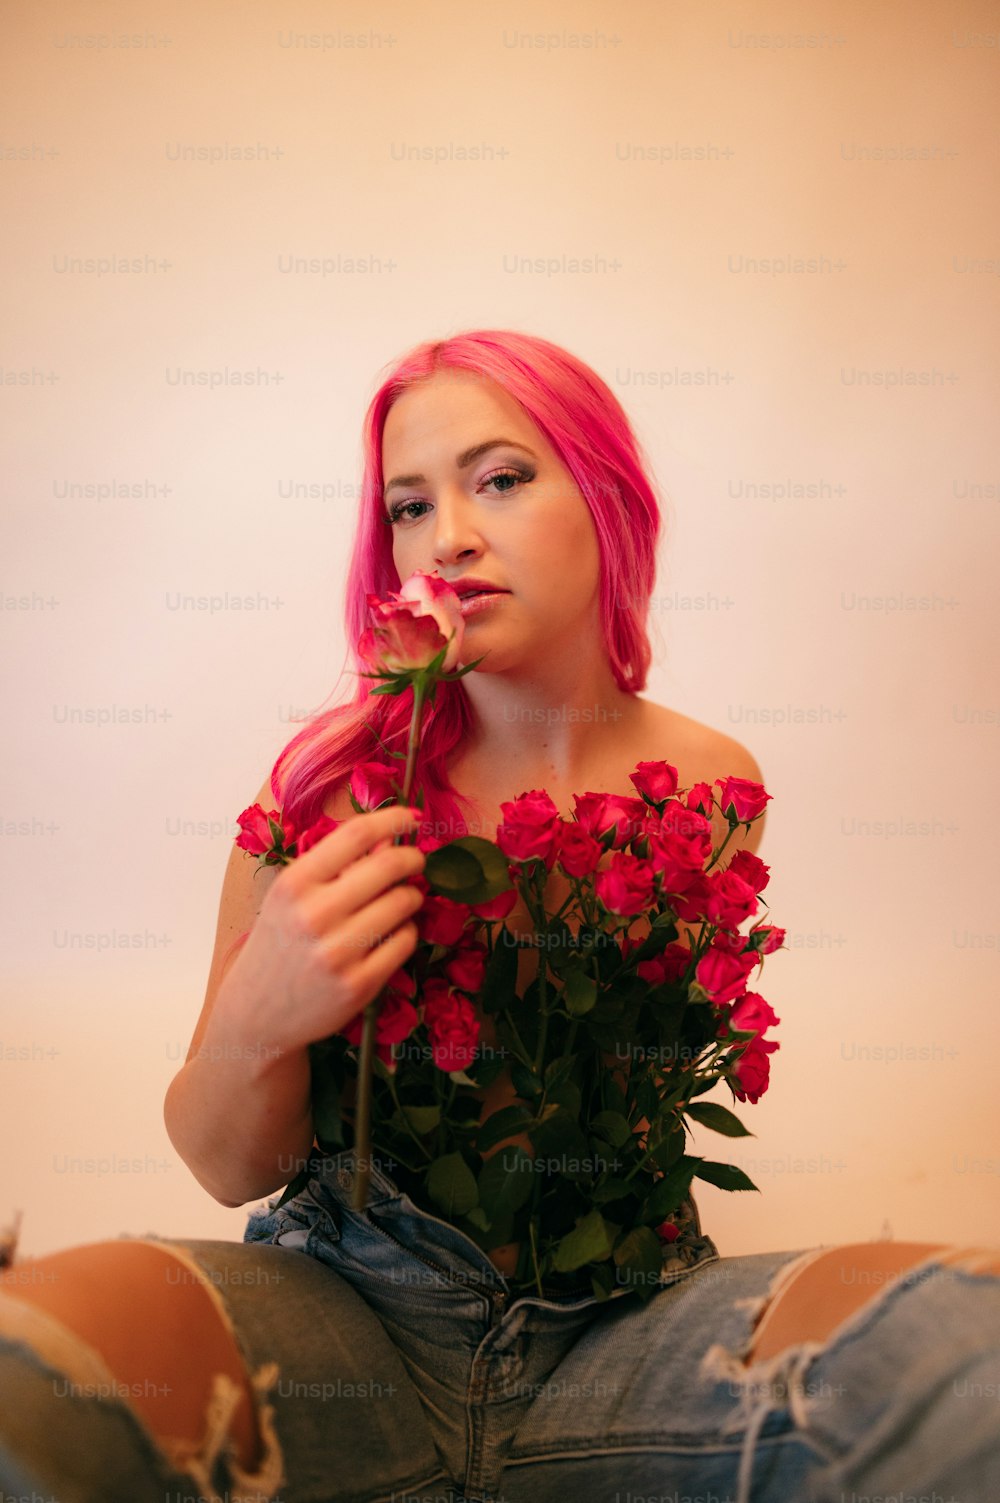 a person with pink hair holding a bouquet of flowers